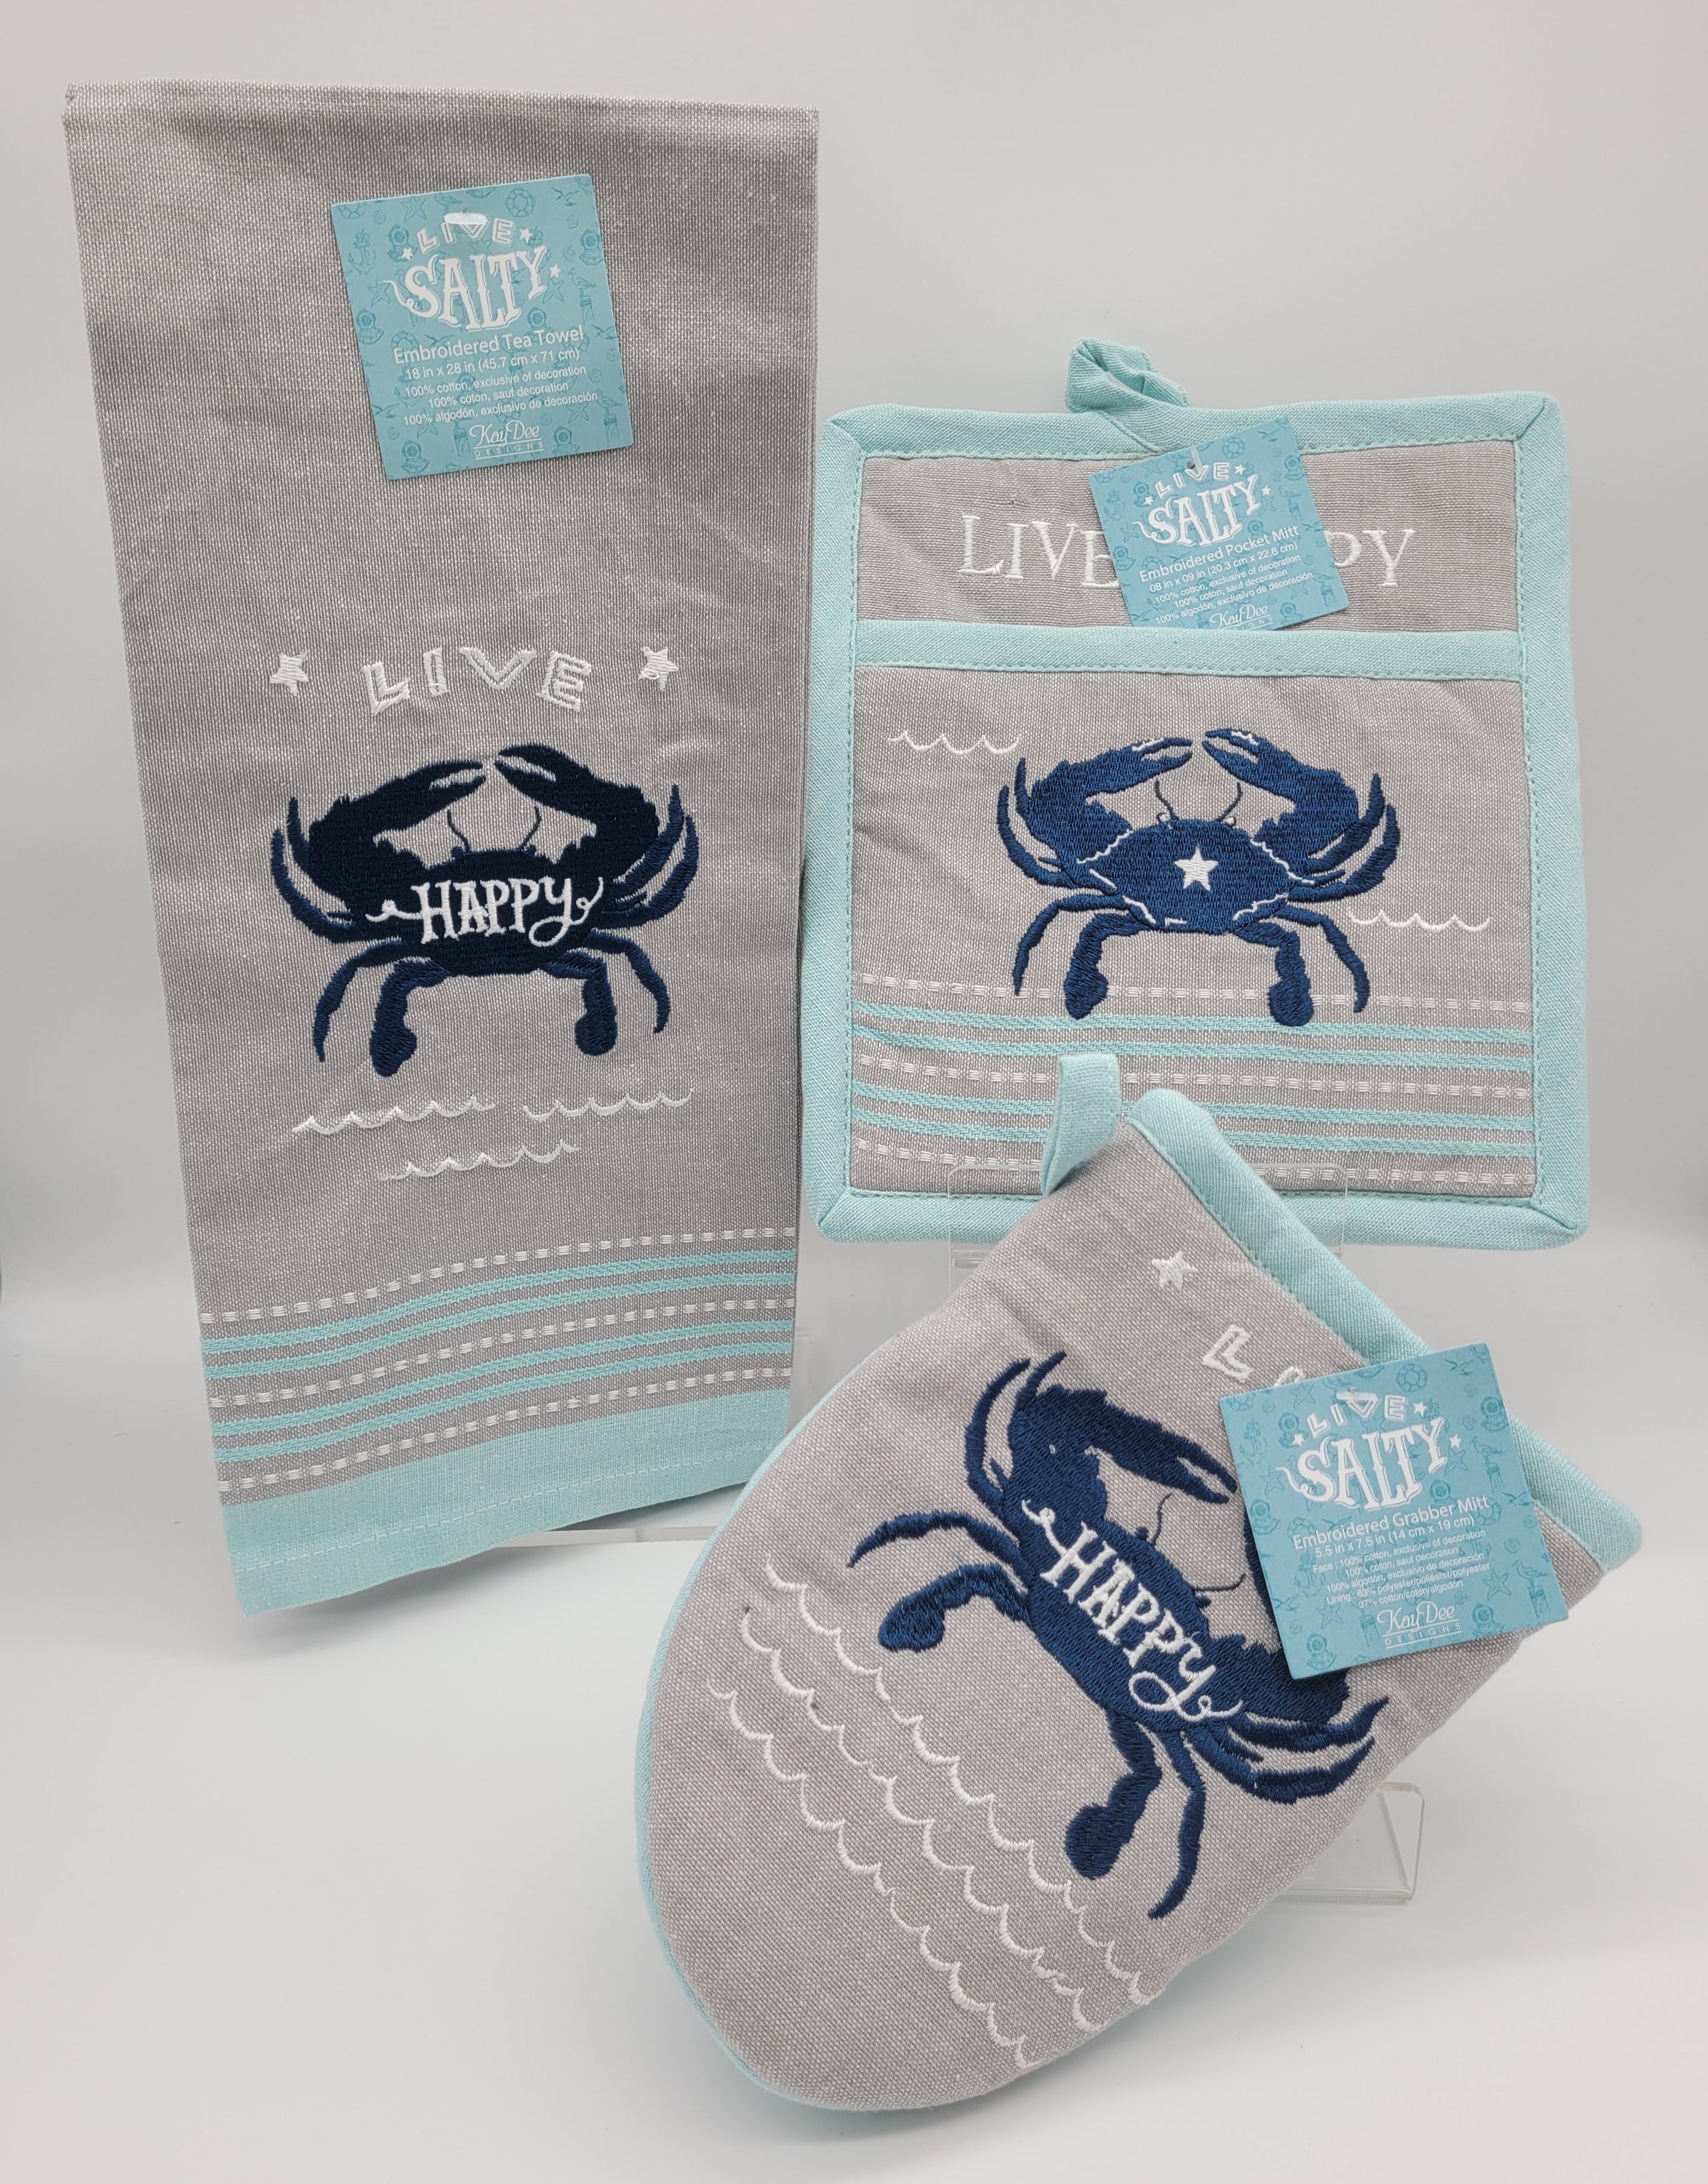 NAUTICAL LIVE HAPPY CRAB EMBROIDERED COTTON OVEN POCKET MITT